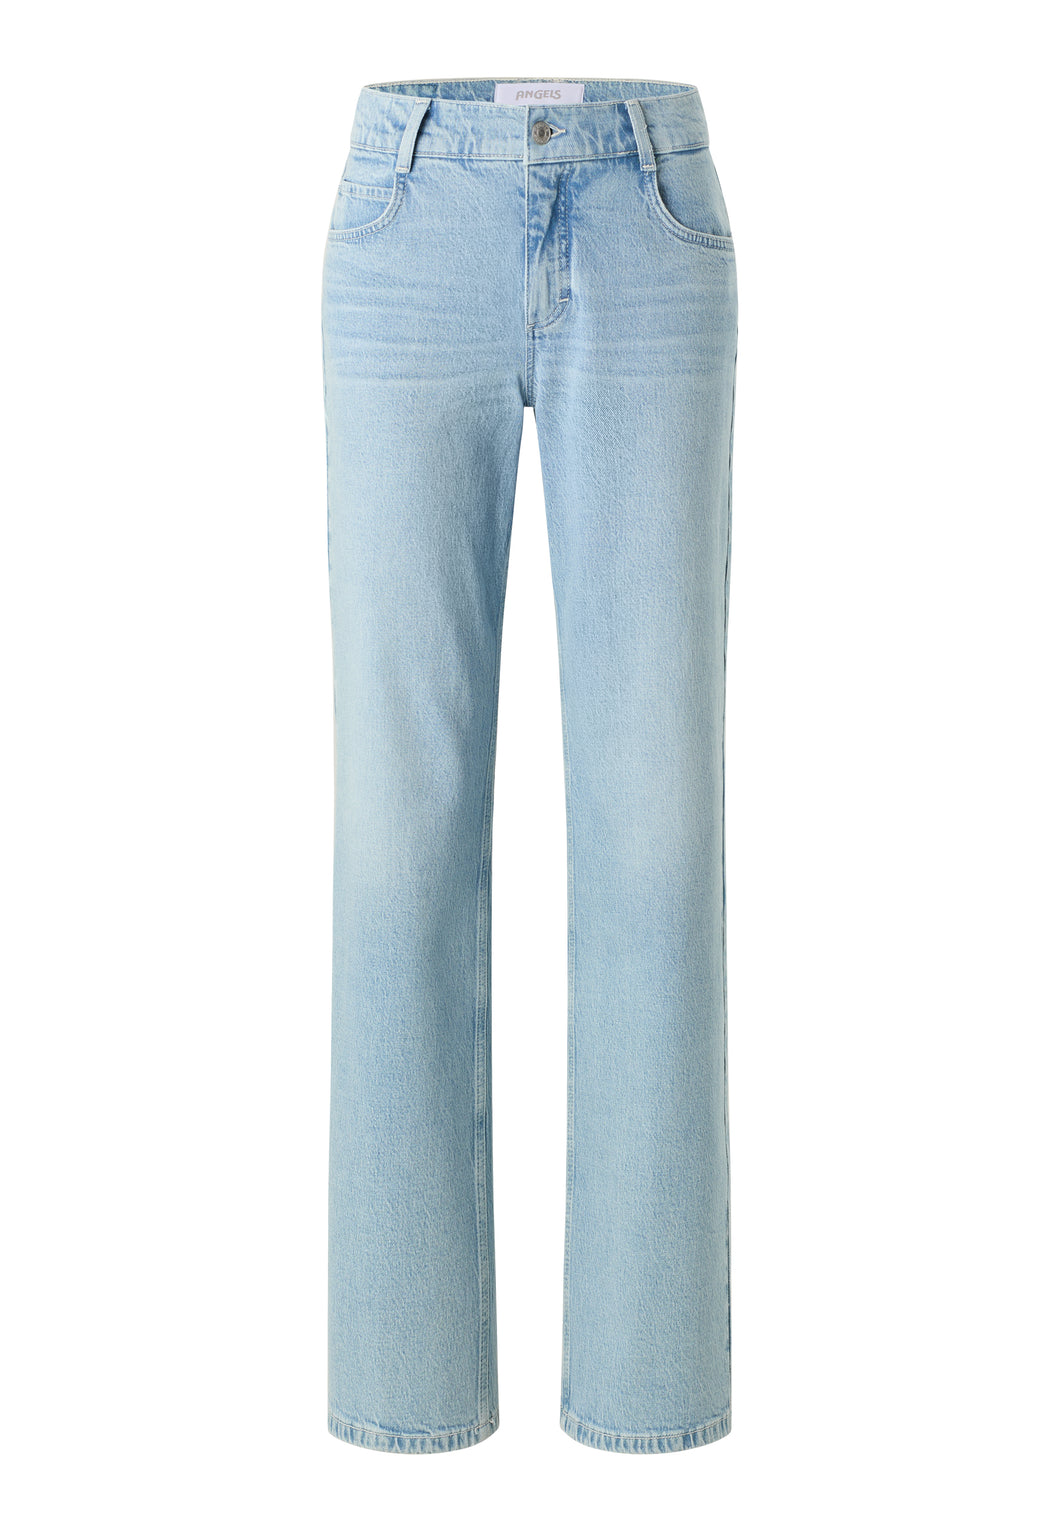 ANGELS JEANS LIZ bleached blue used